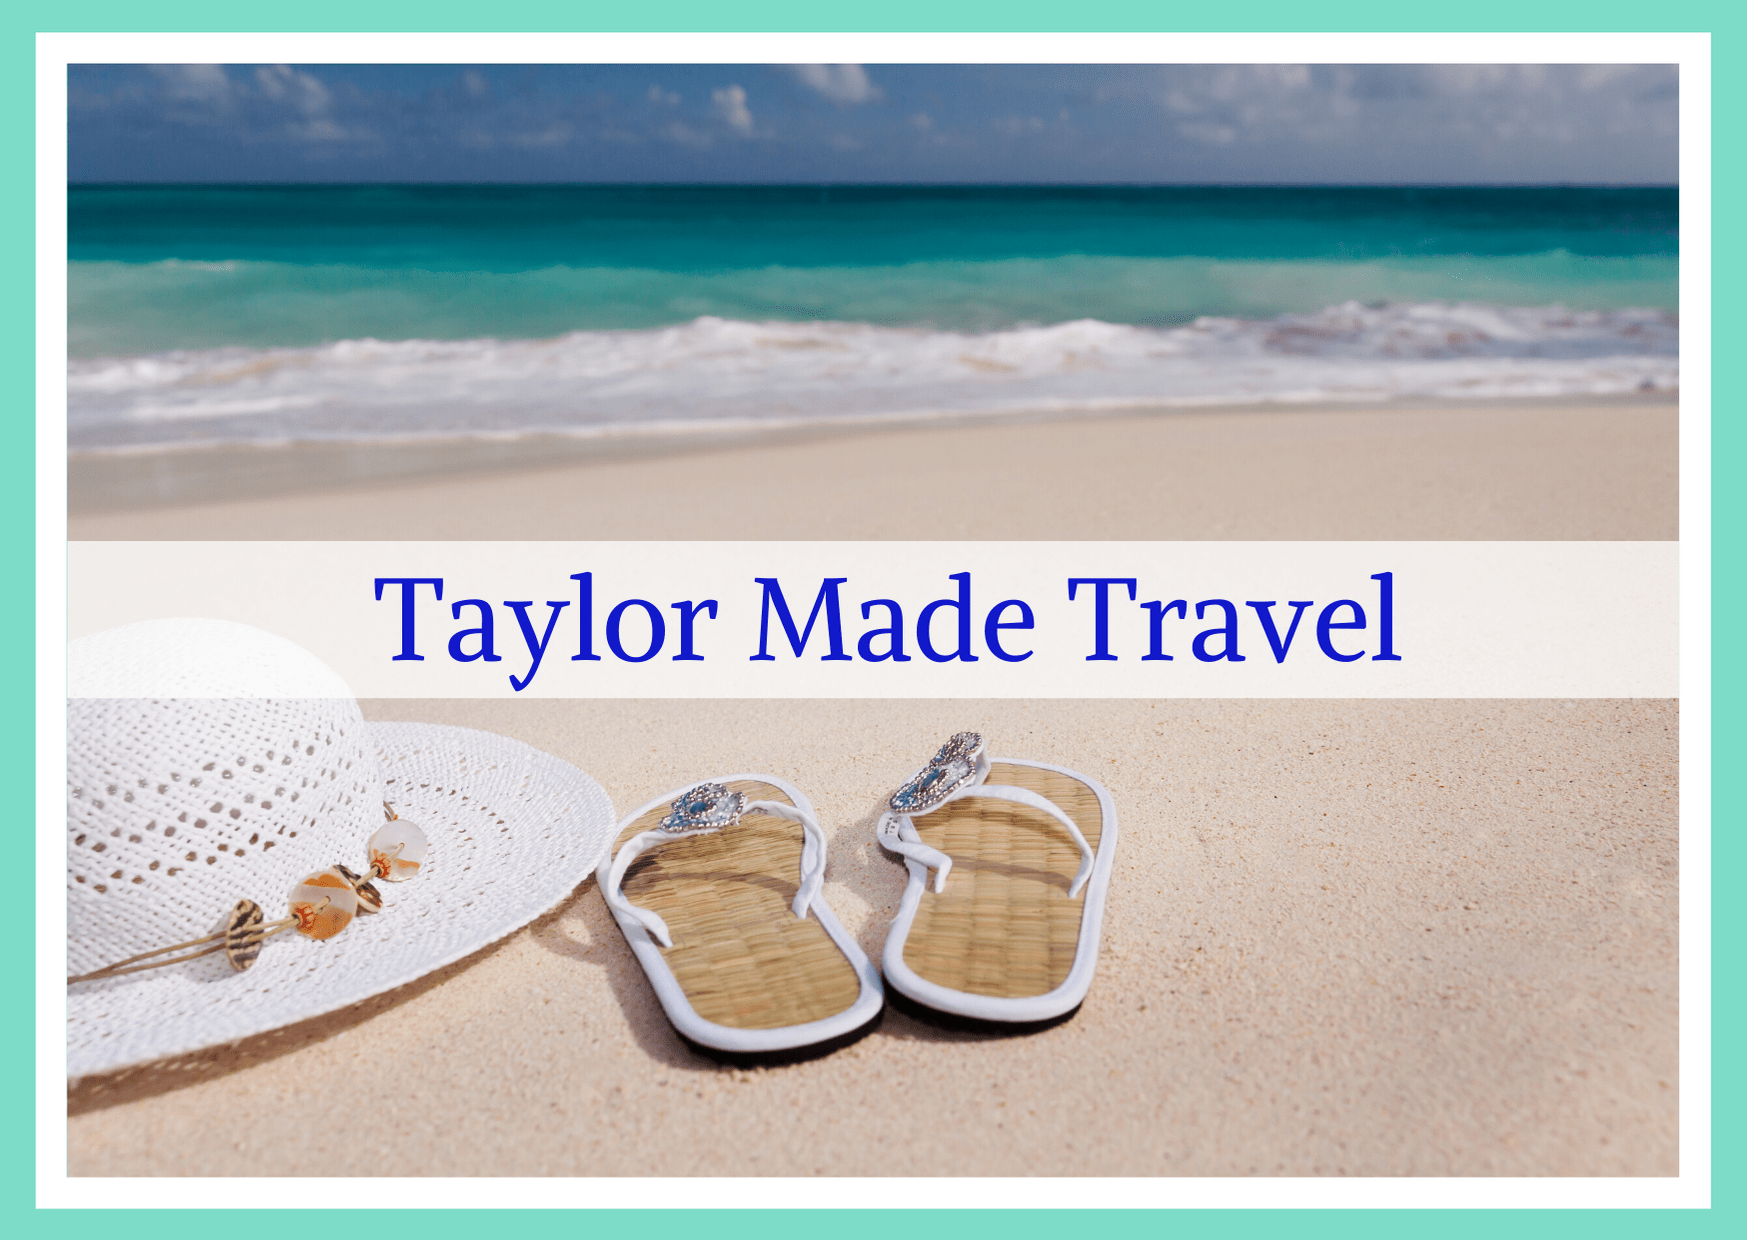 Taylor Made Travel Booking Services from Taylor Made PA Virtual Assistant Services with Premier Travel